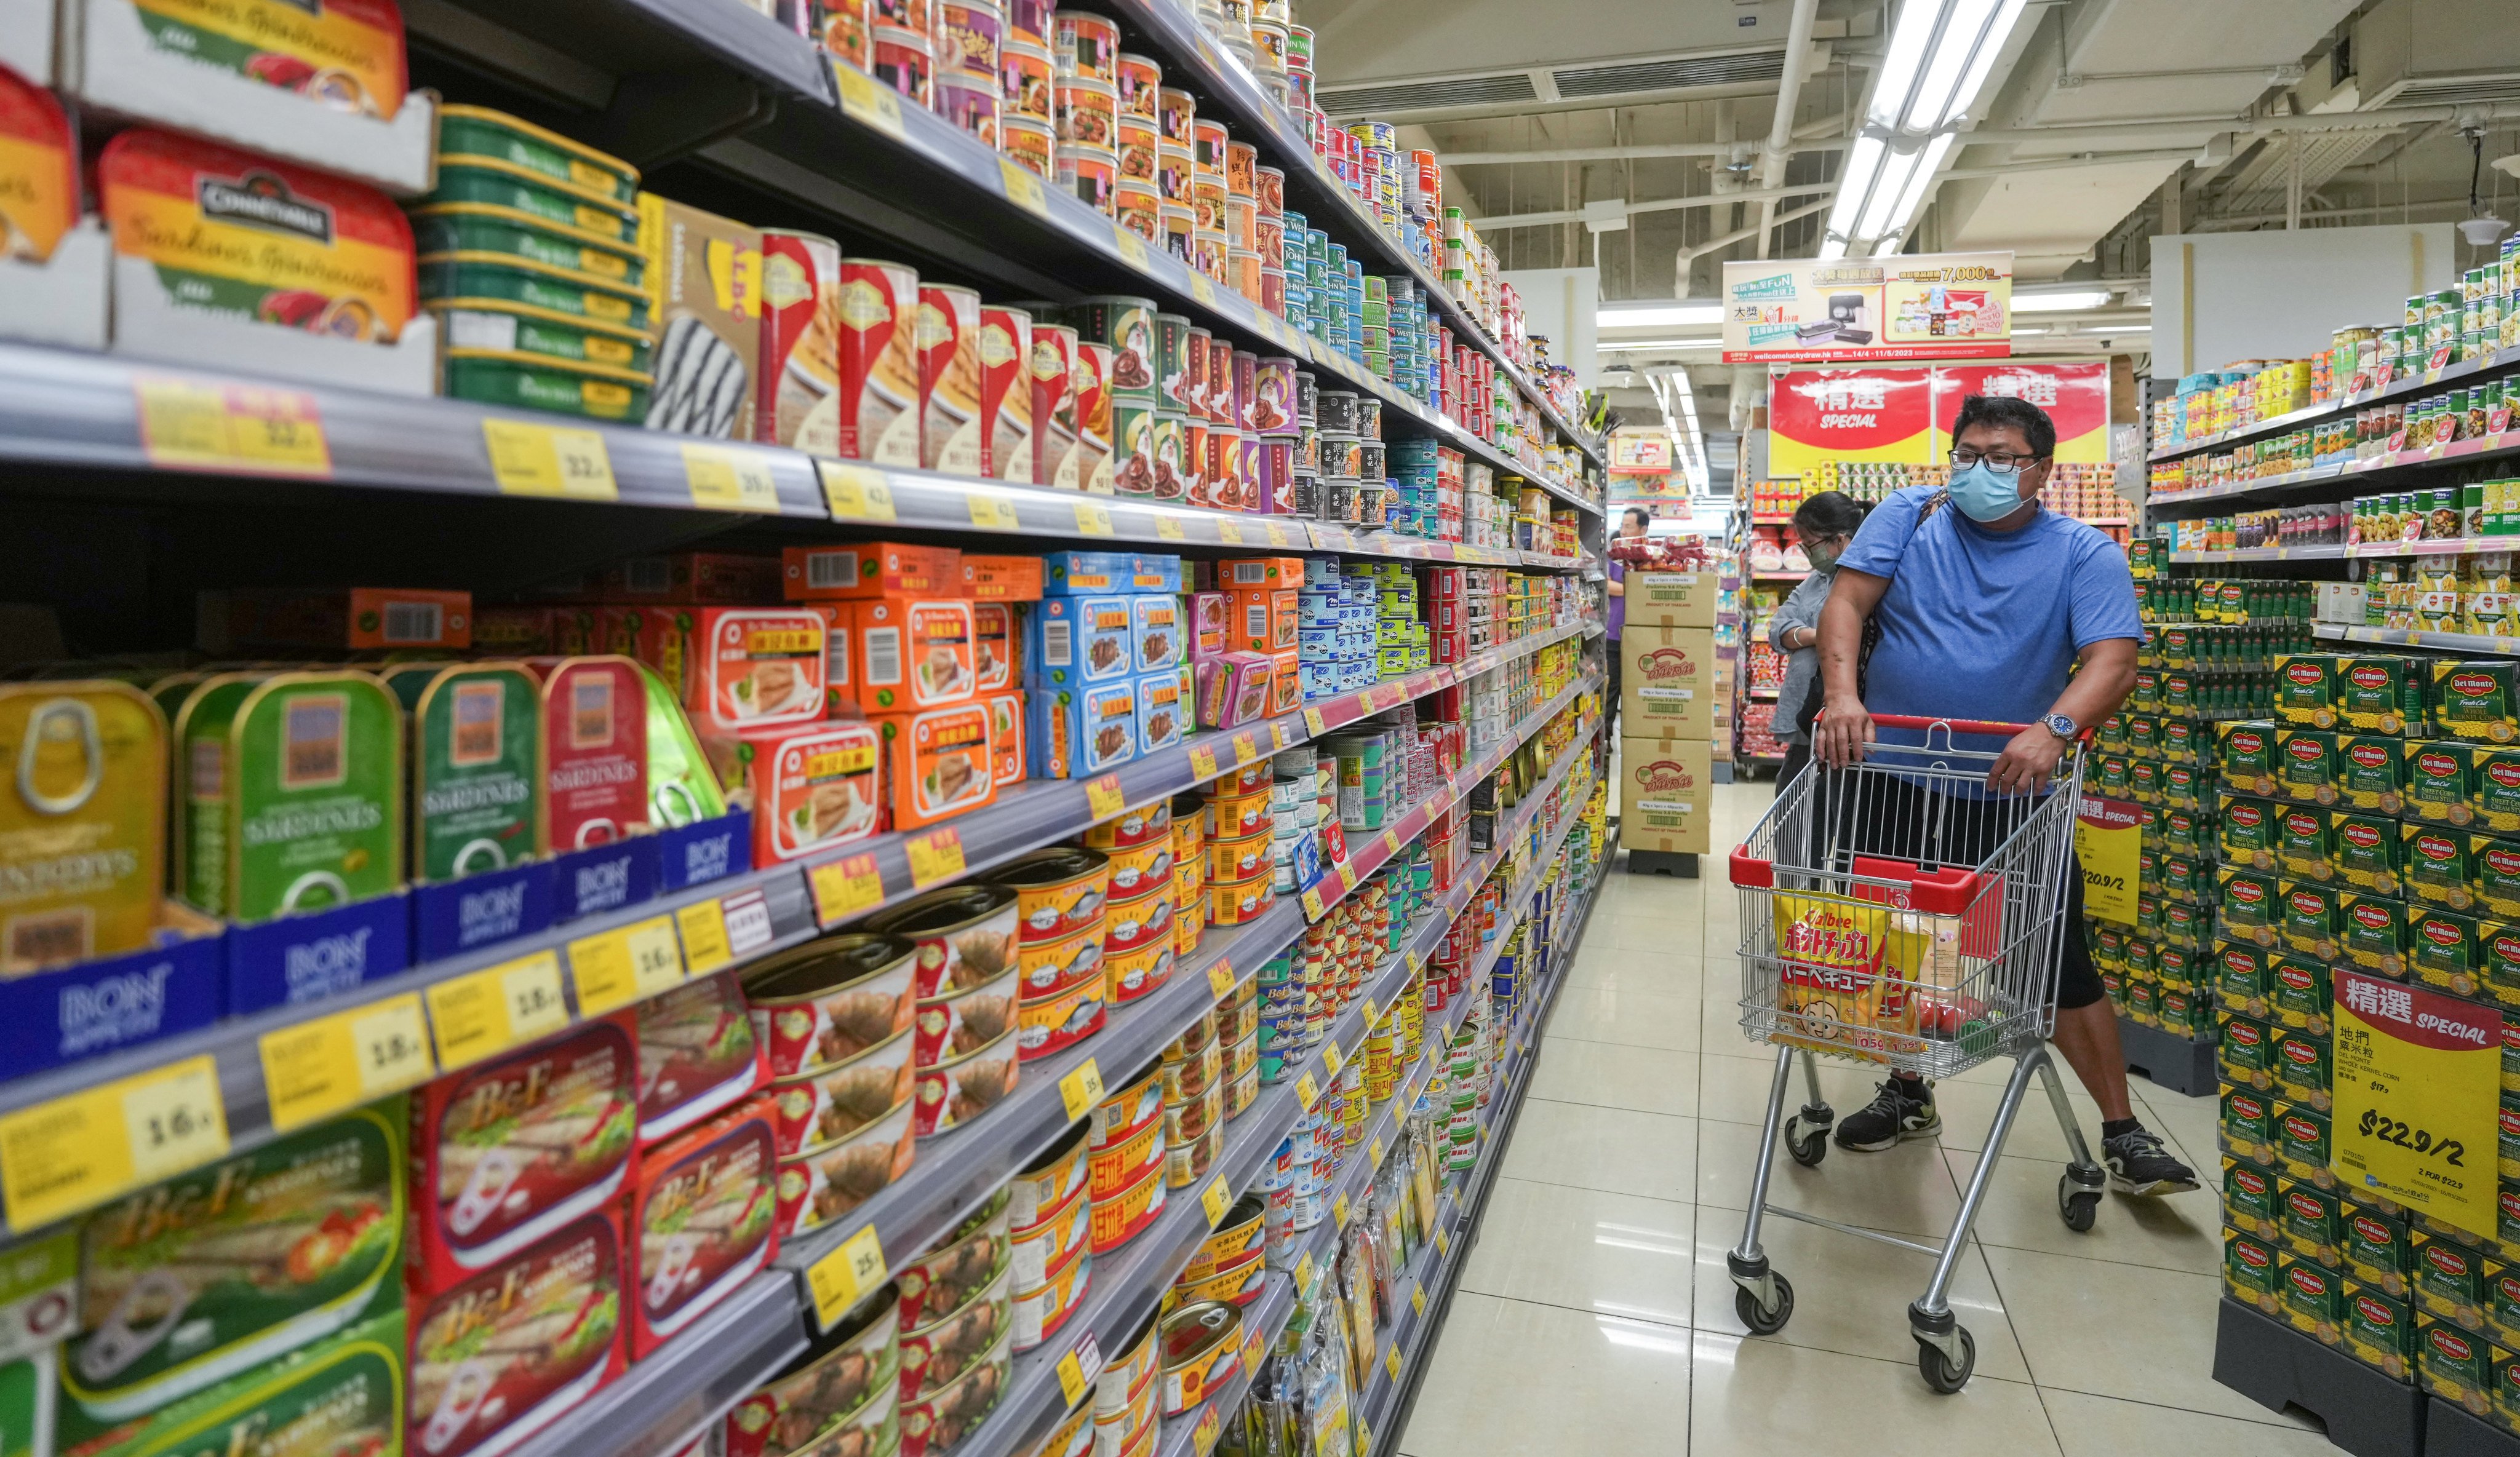 The Consumer Council has said last year’s increase was lower than in 2022 and that the price of some staples had stabilised since the Covid-19 pandemic. Photo: Sam Tsang